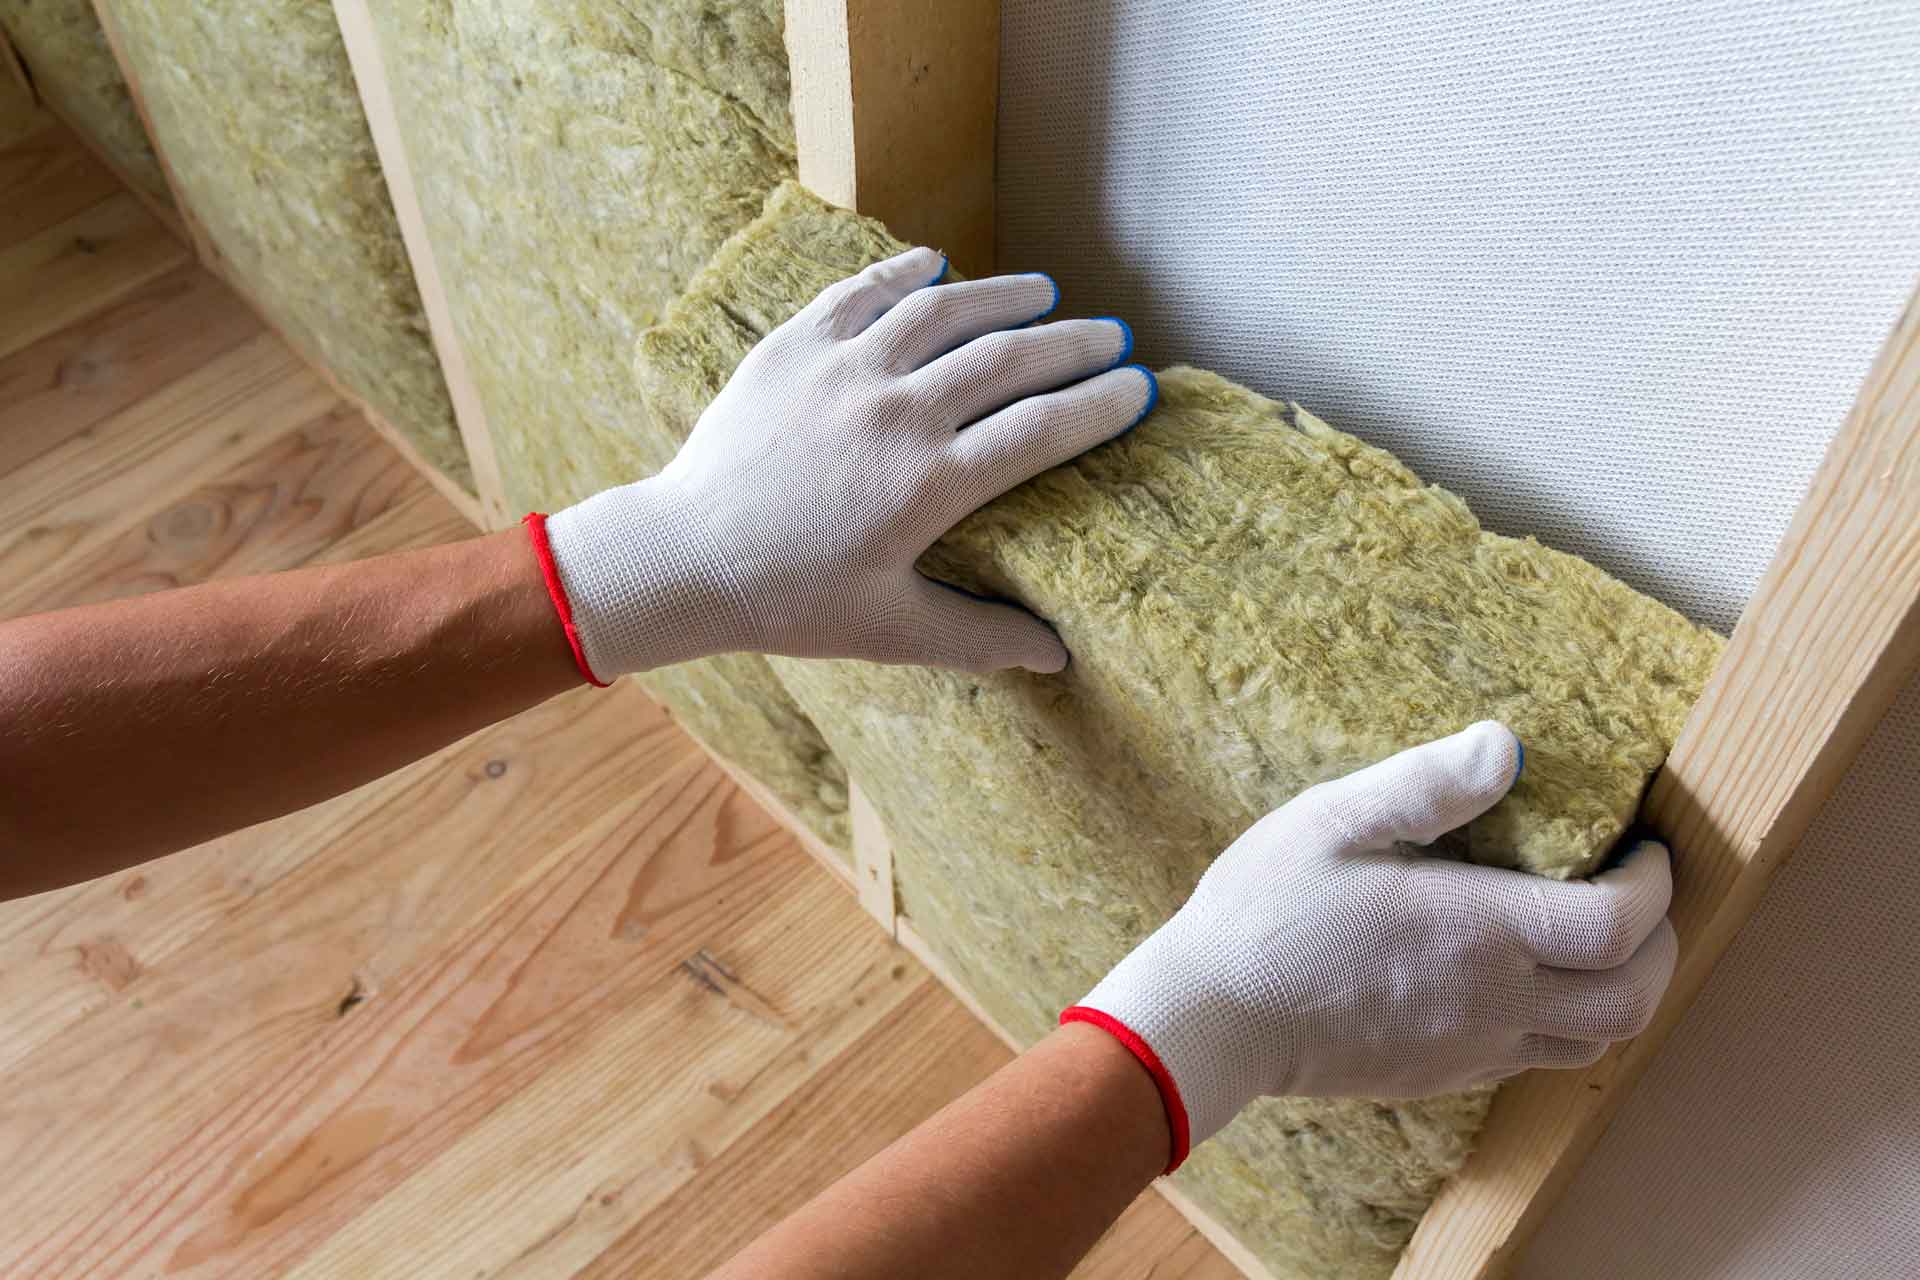 Two gloved hands removing a panel of rock wool insulation